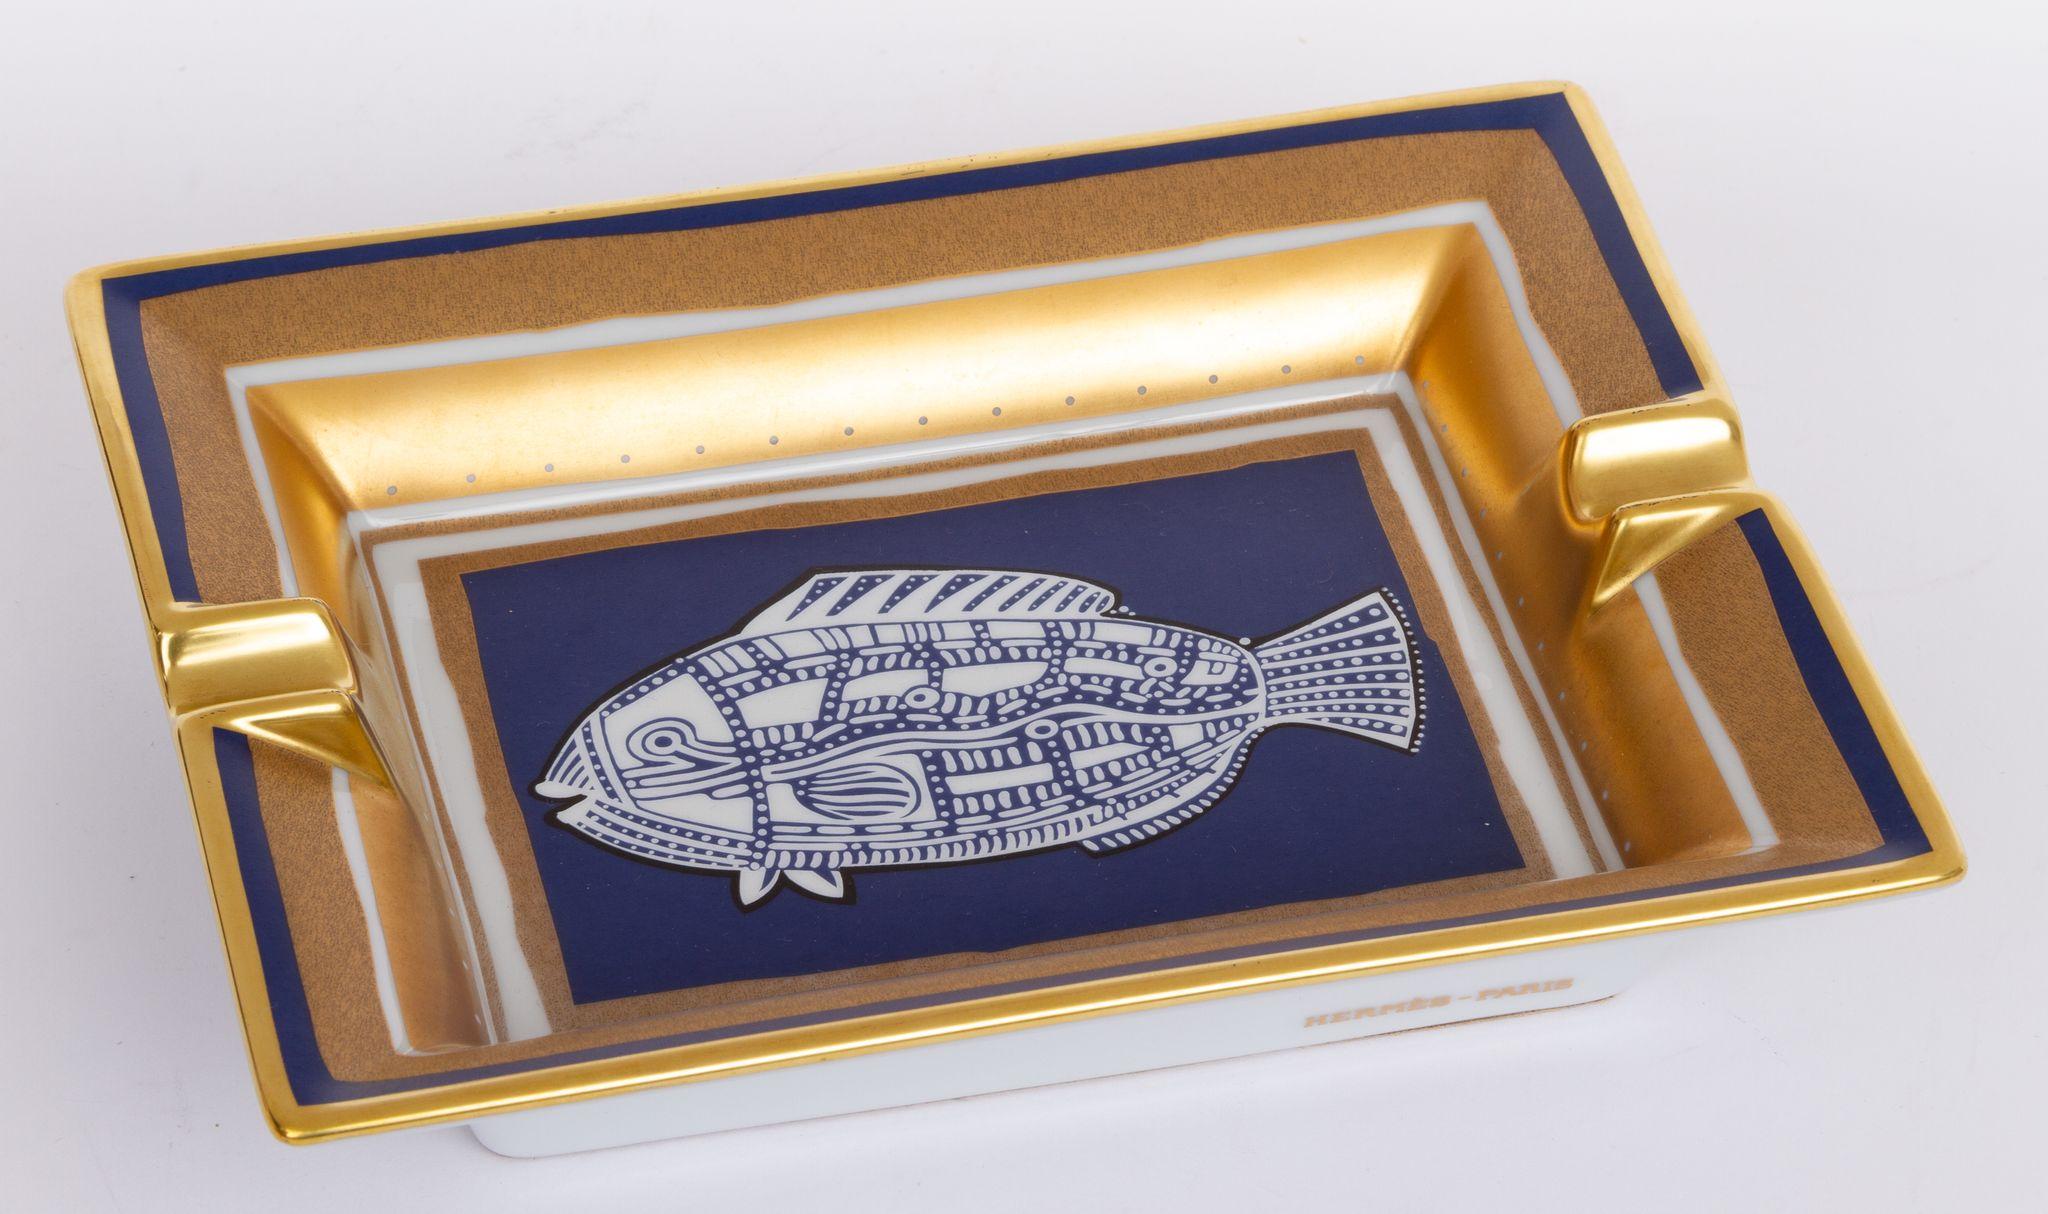 Hermès vintage ashtray in blue and gold. In the center of the piece is a print of an abstract fish. The ashtray is in excellent condition.